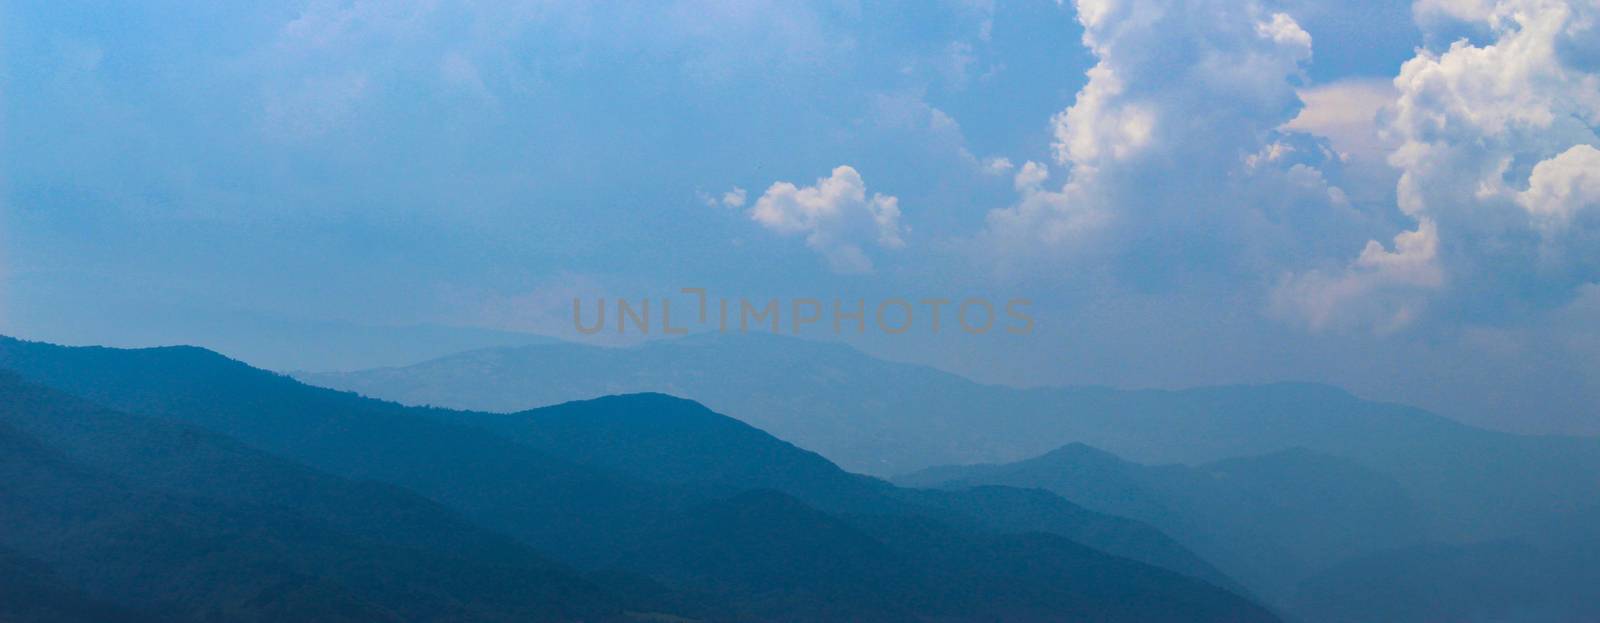 Banner of blue silhouettes of mountains in the distance, with clouds in the blue sky. Mountains and hills in the distance. by mahirrov